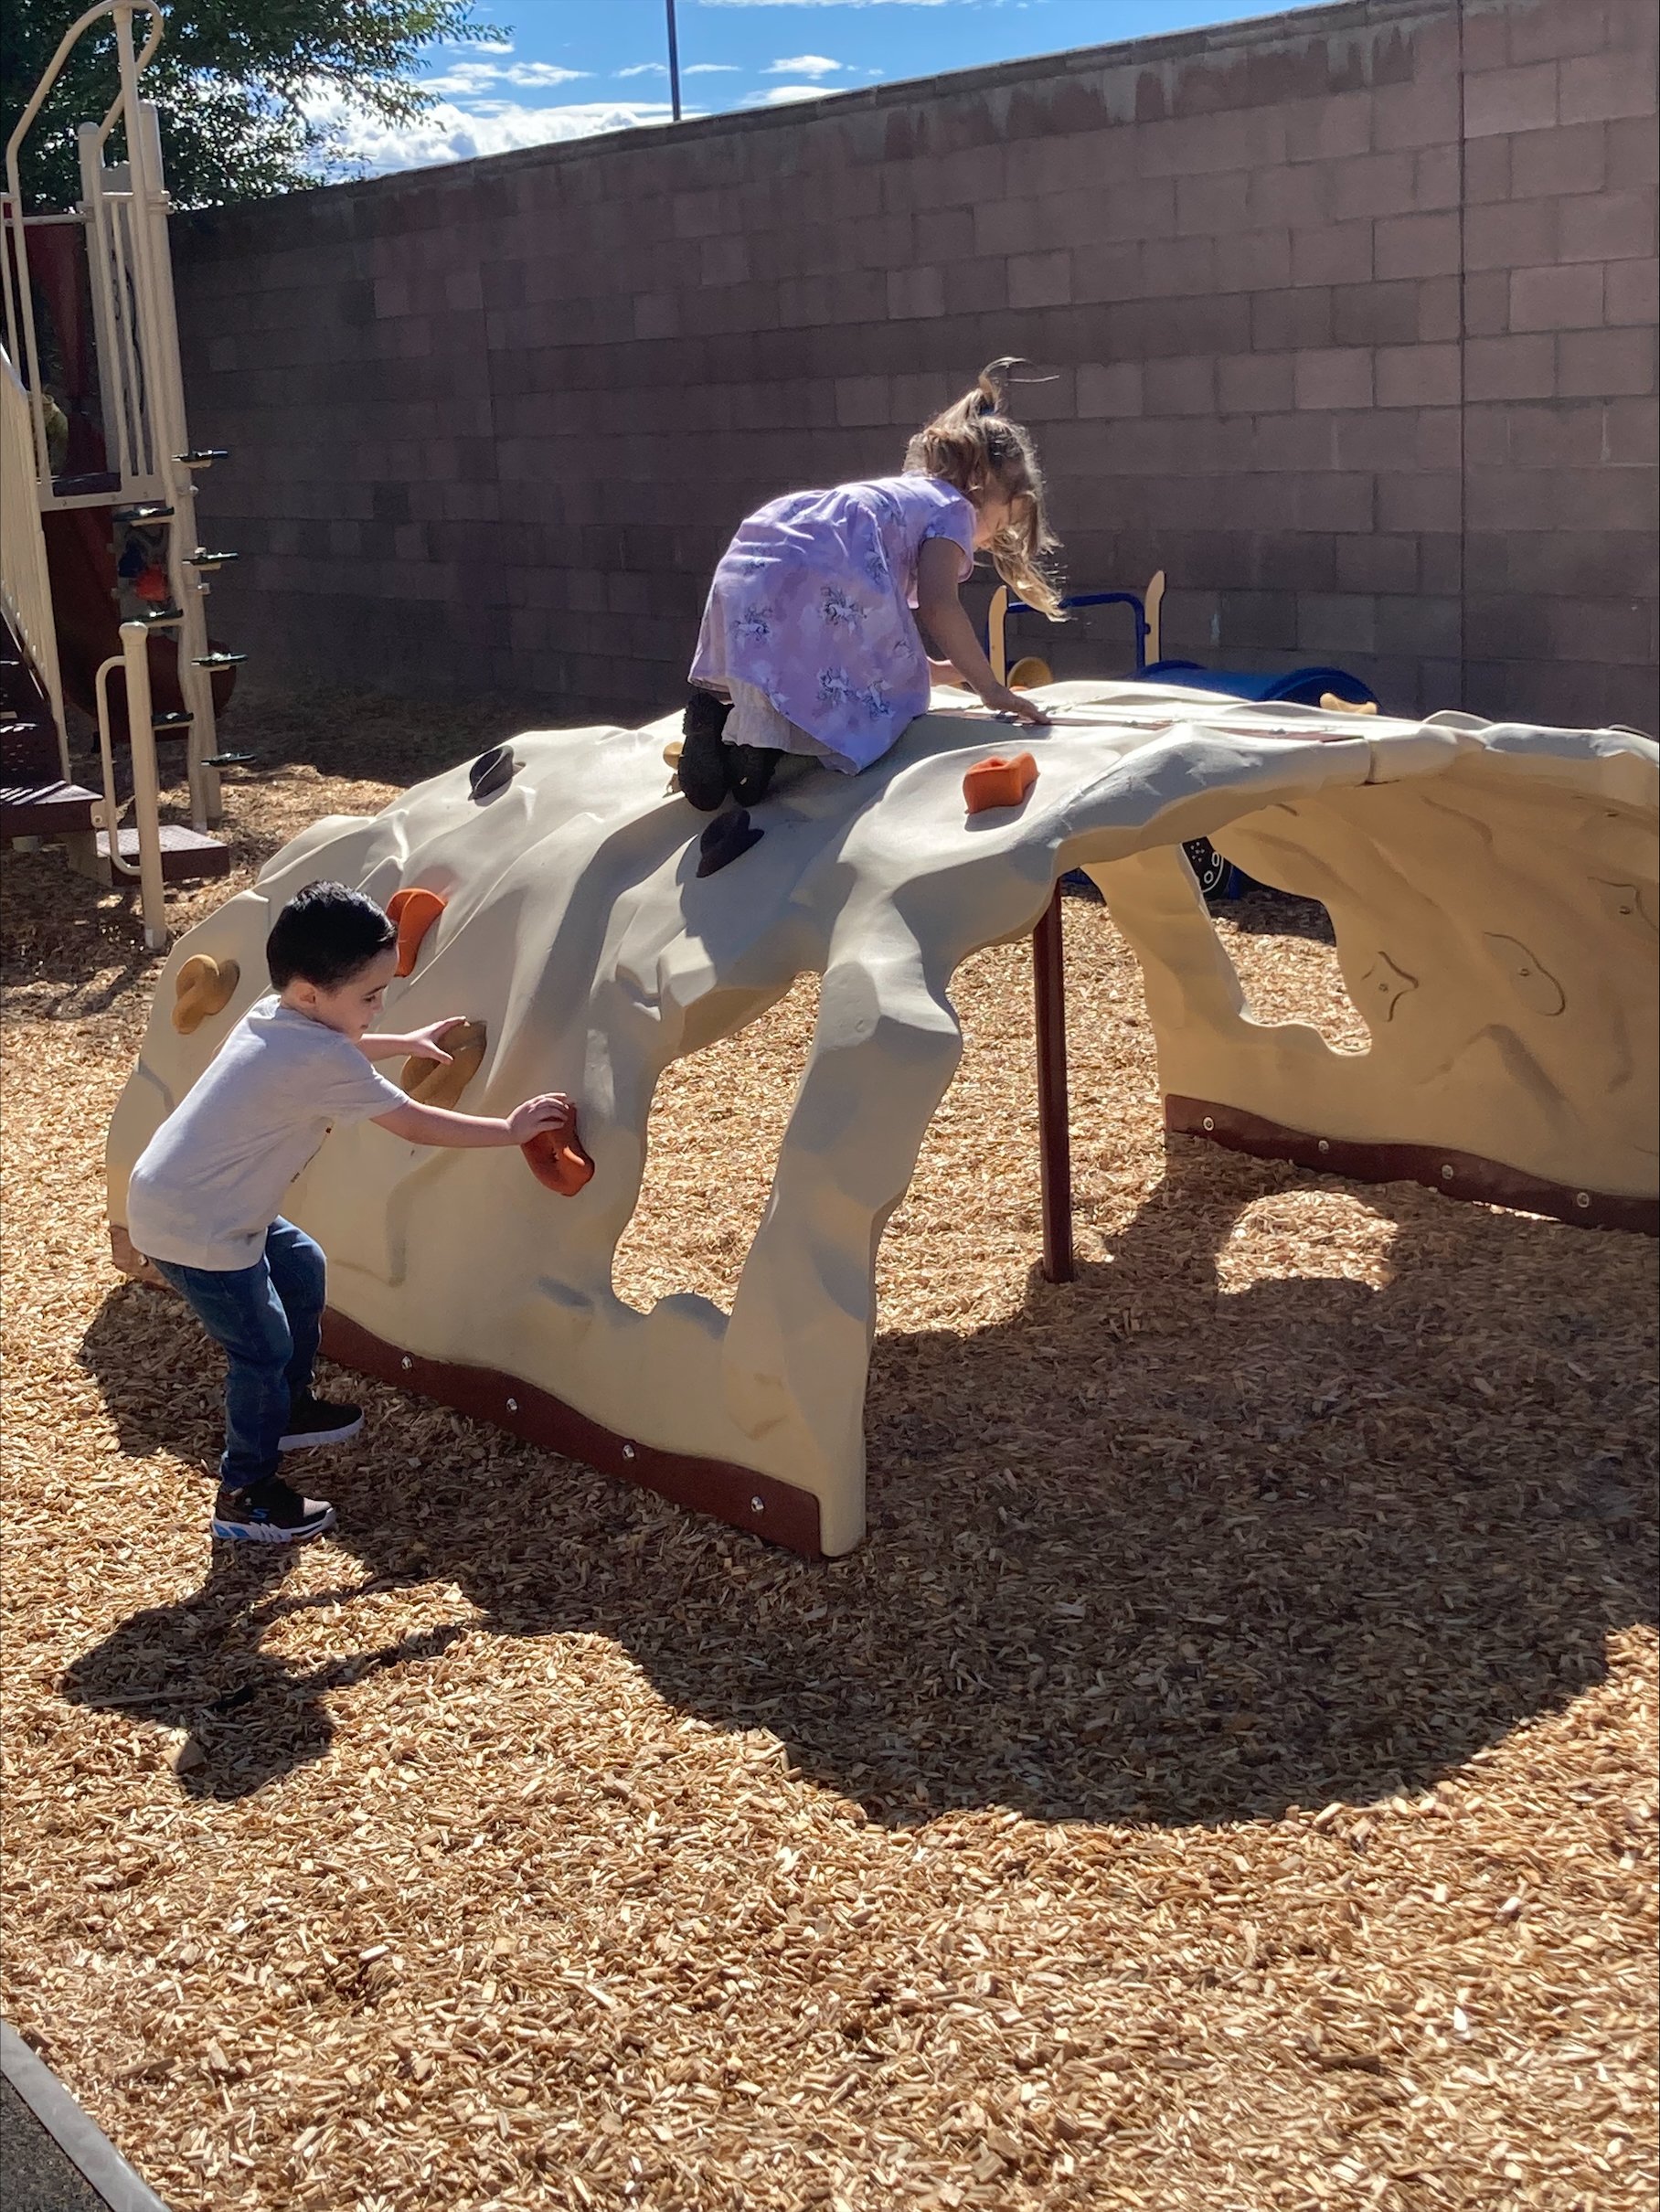 Students playing on new playground equipment